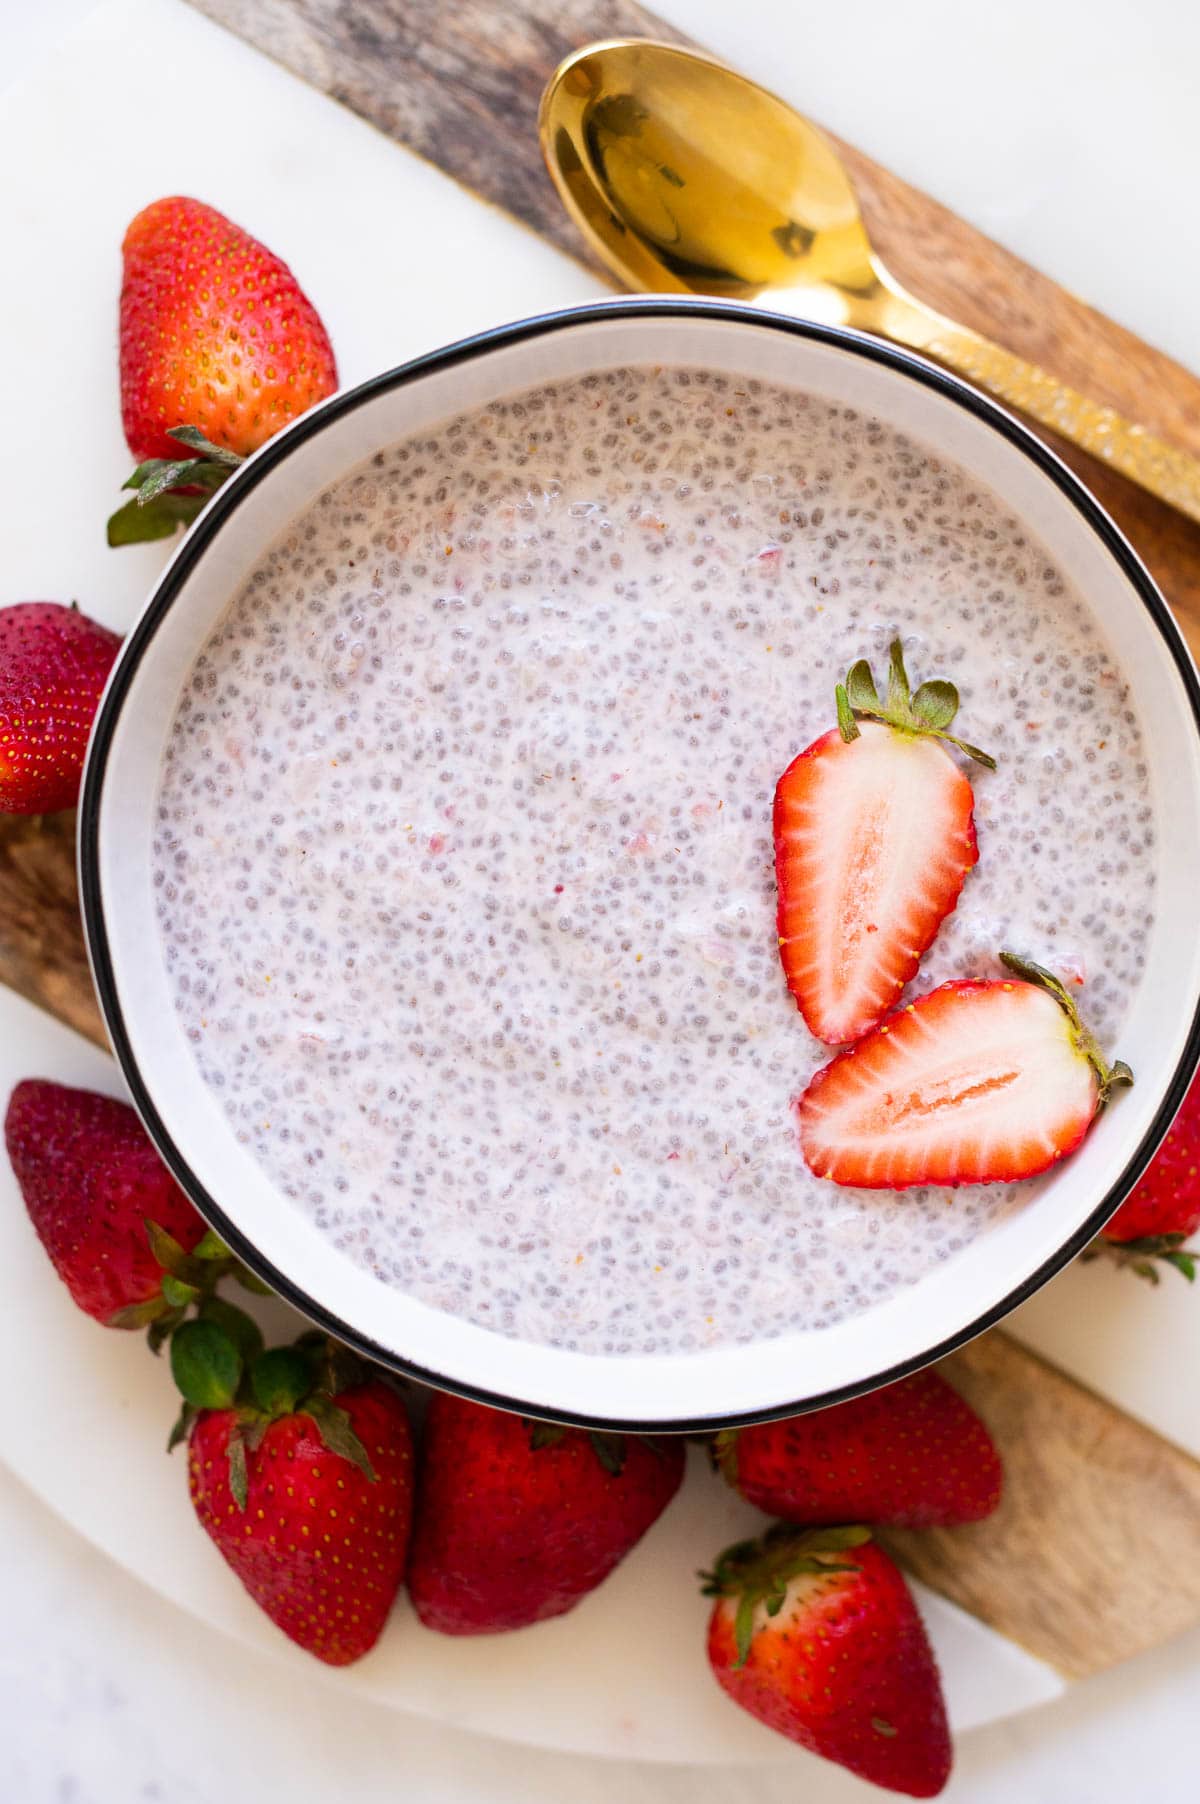 Strawberry chia seed pudding in a bowl garnished with fresh strawberries.